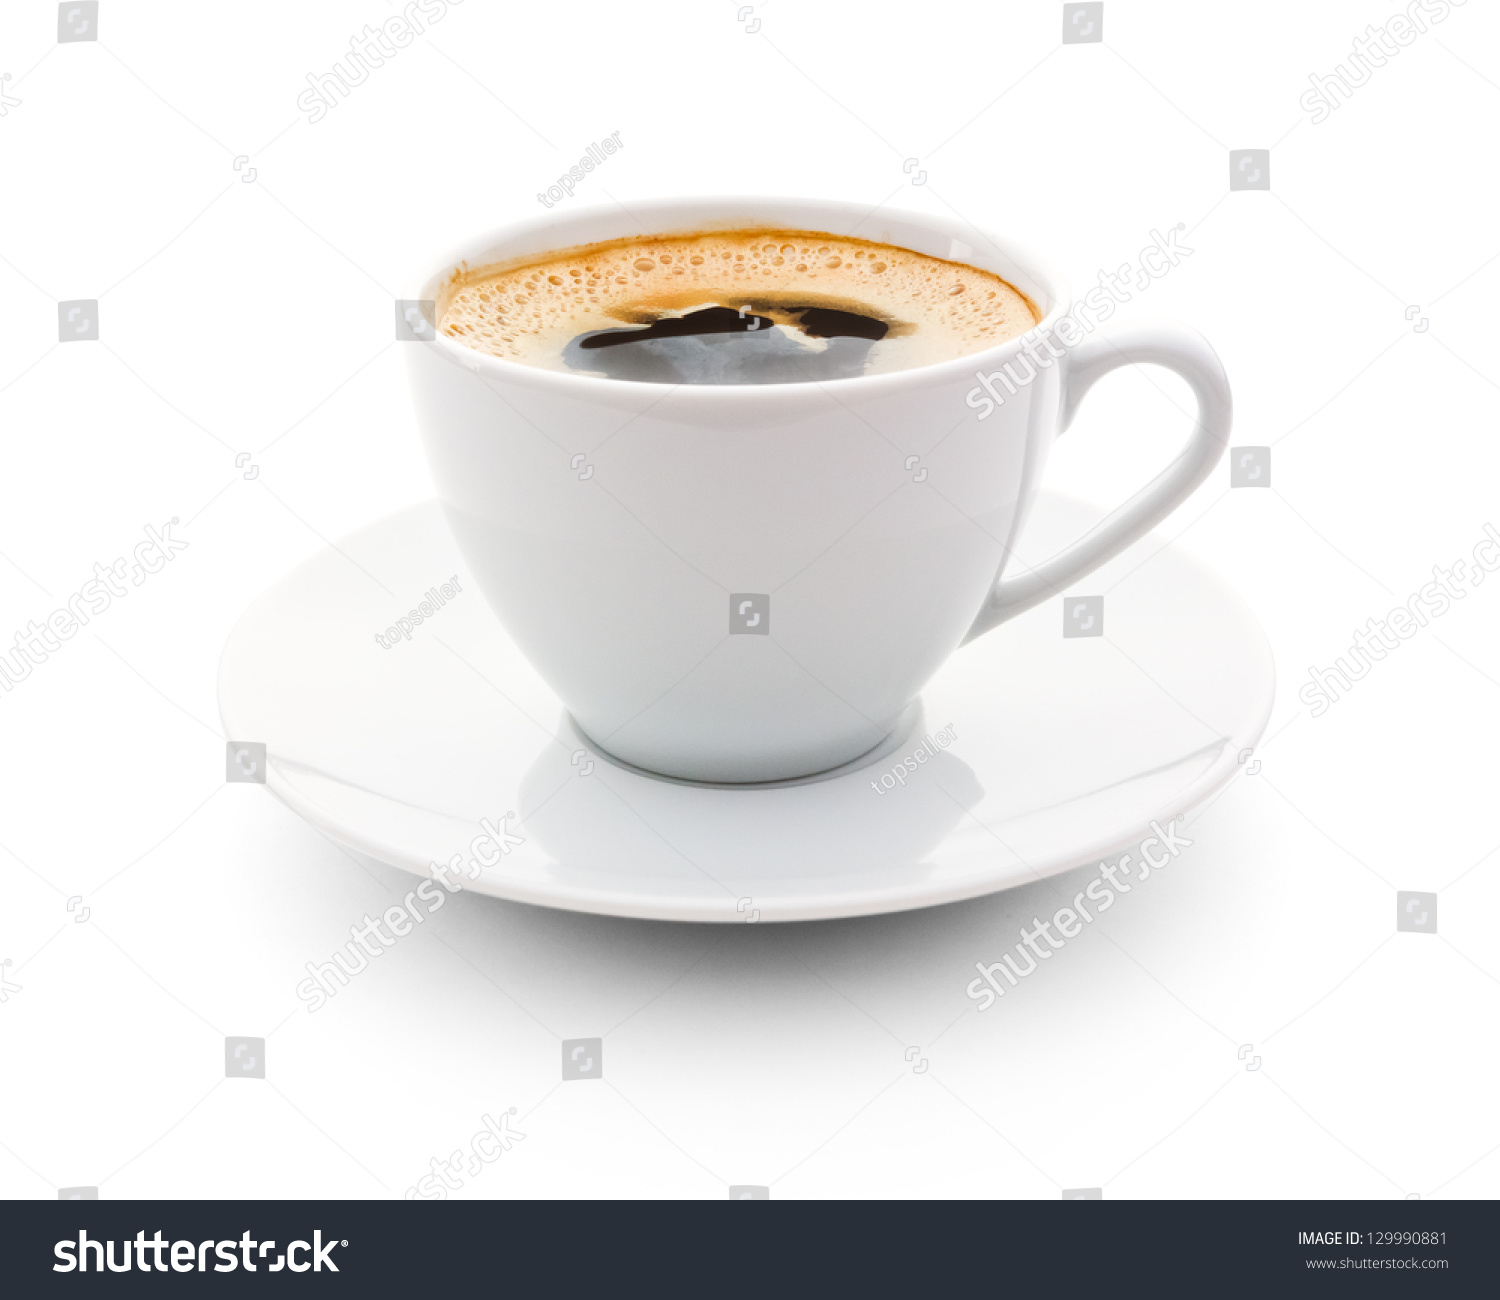 cup of coffee over white background #129990881